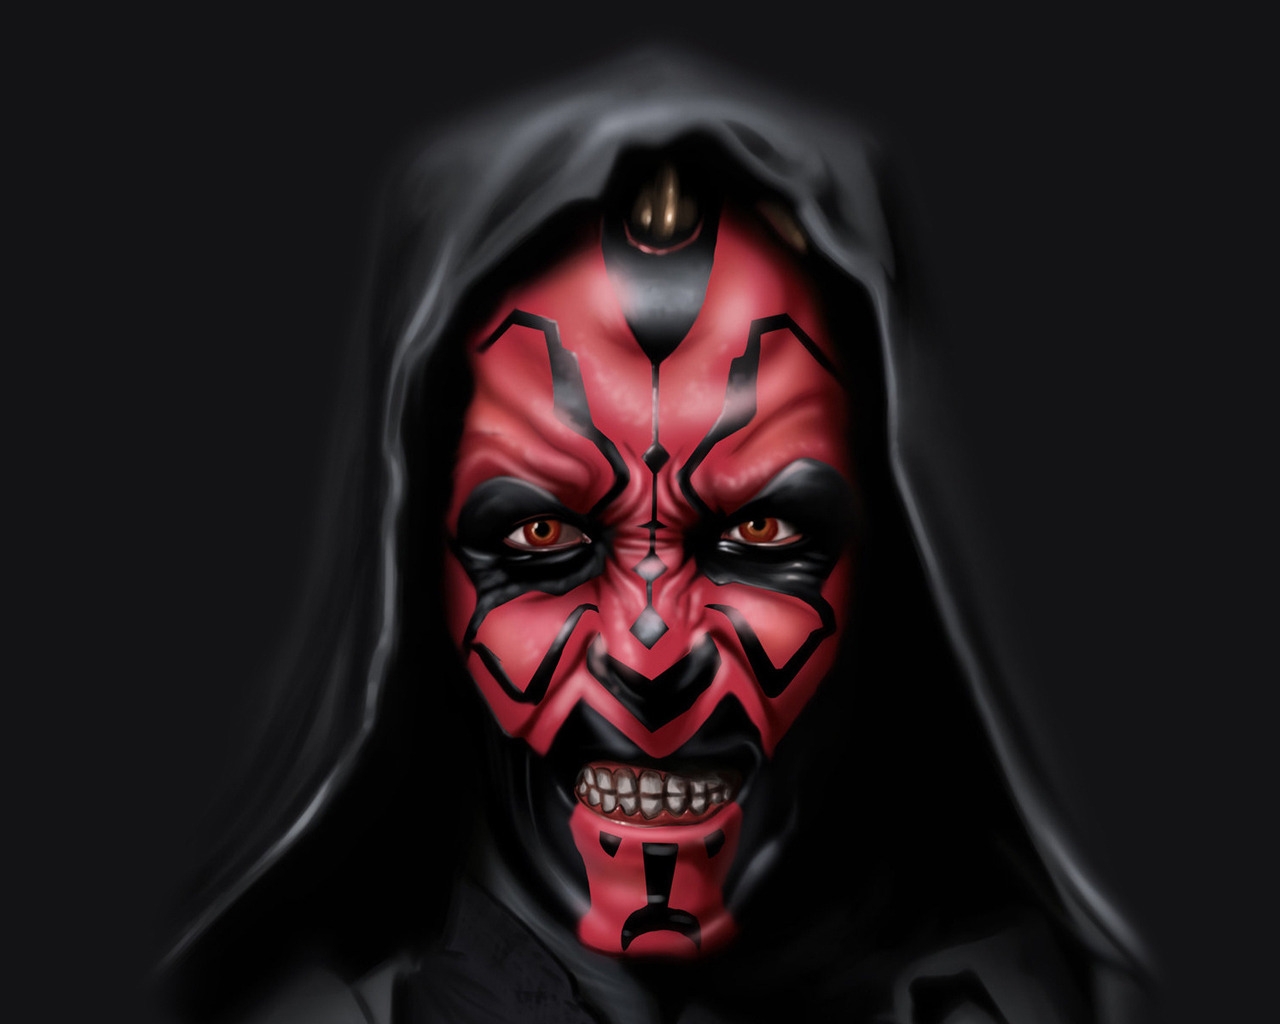 Darth Vader Animated for 1280 x 1024 resolution